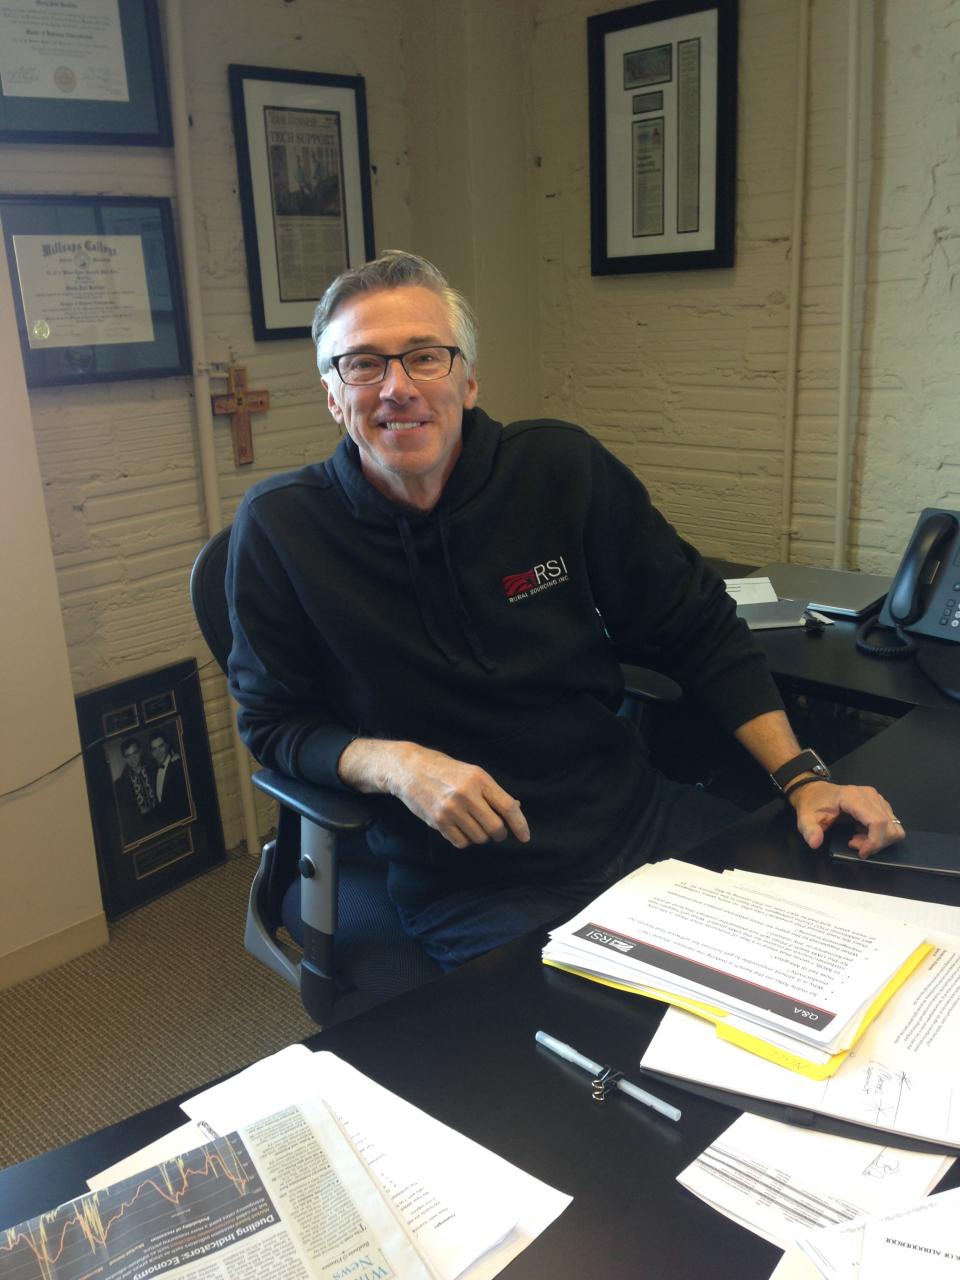 Our CEO in his RSI Hoodie